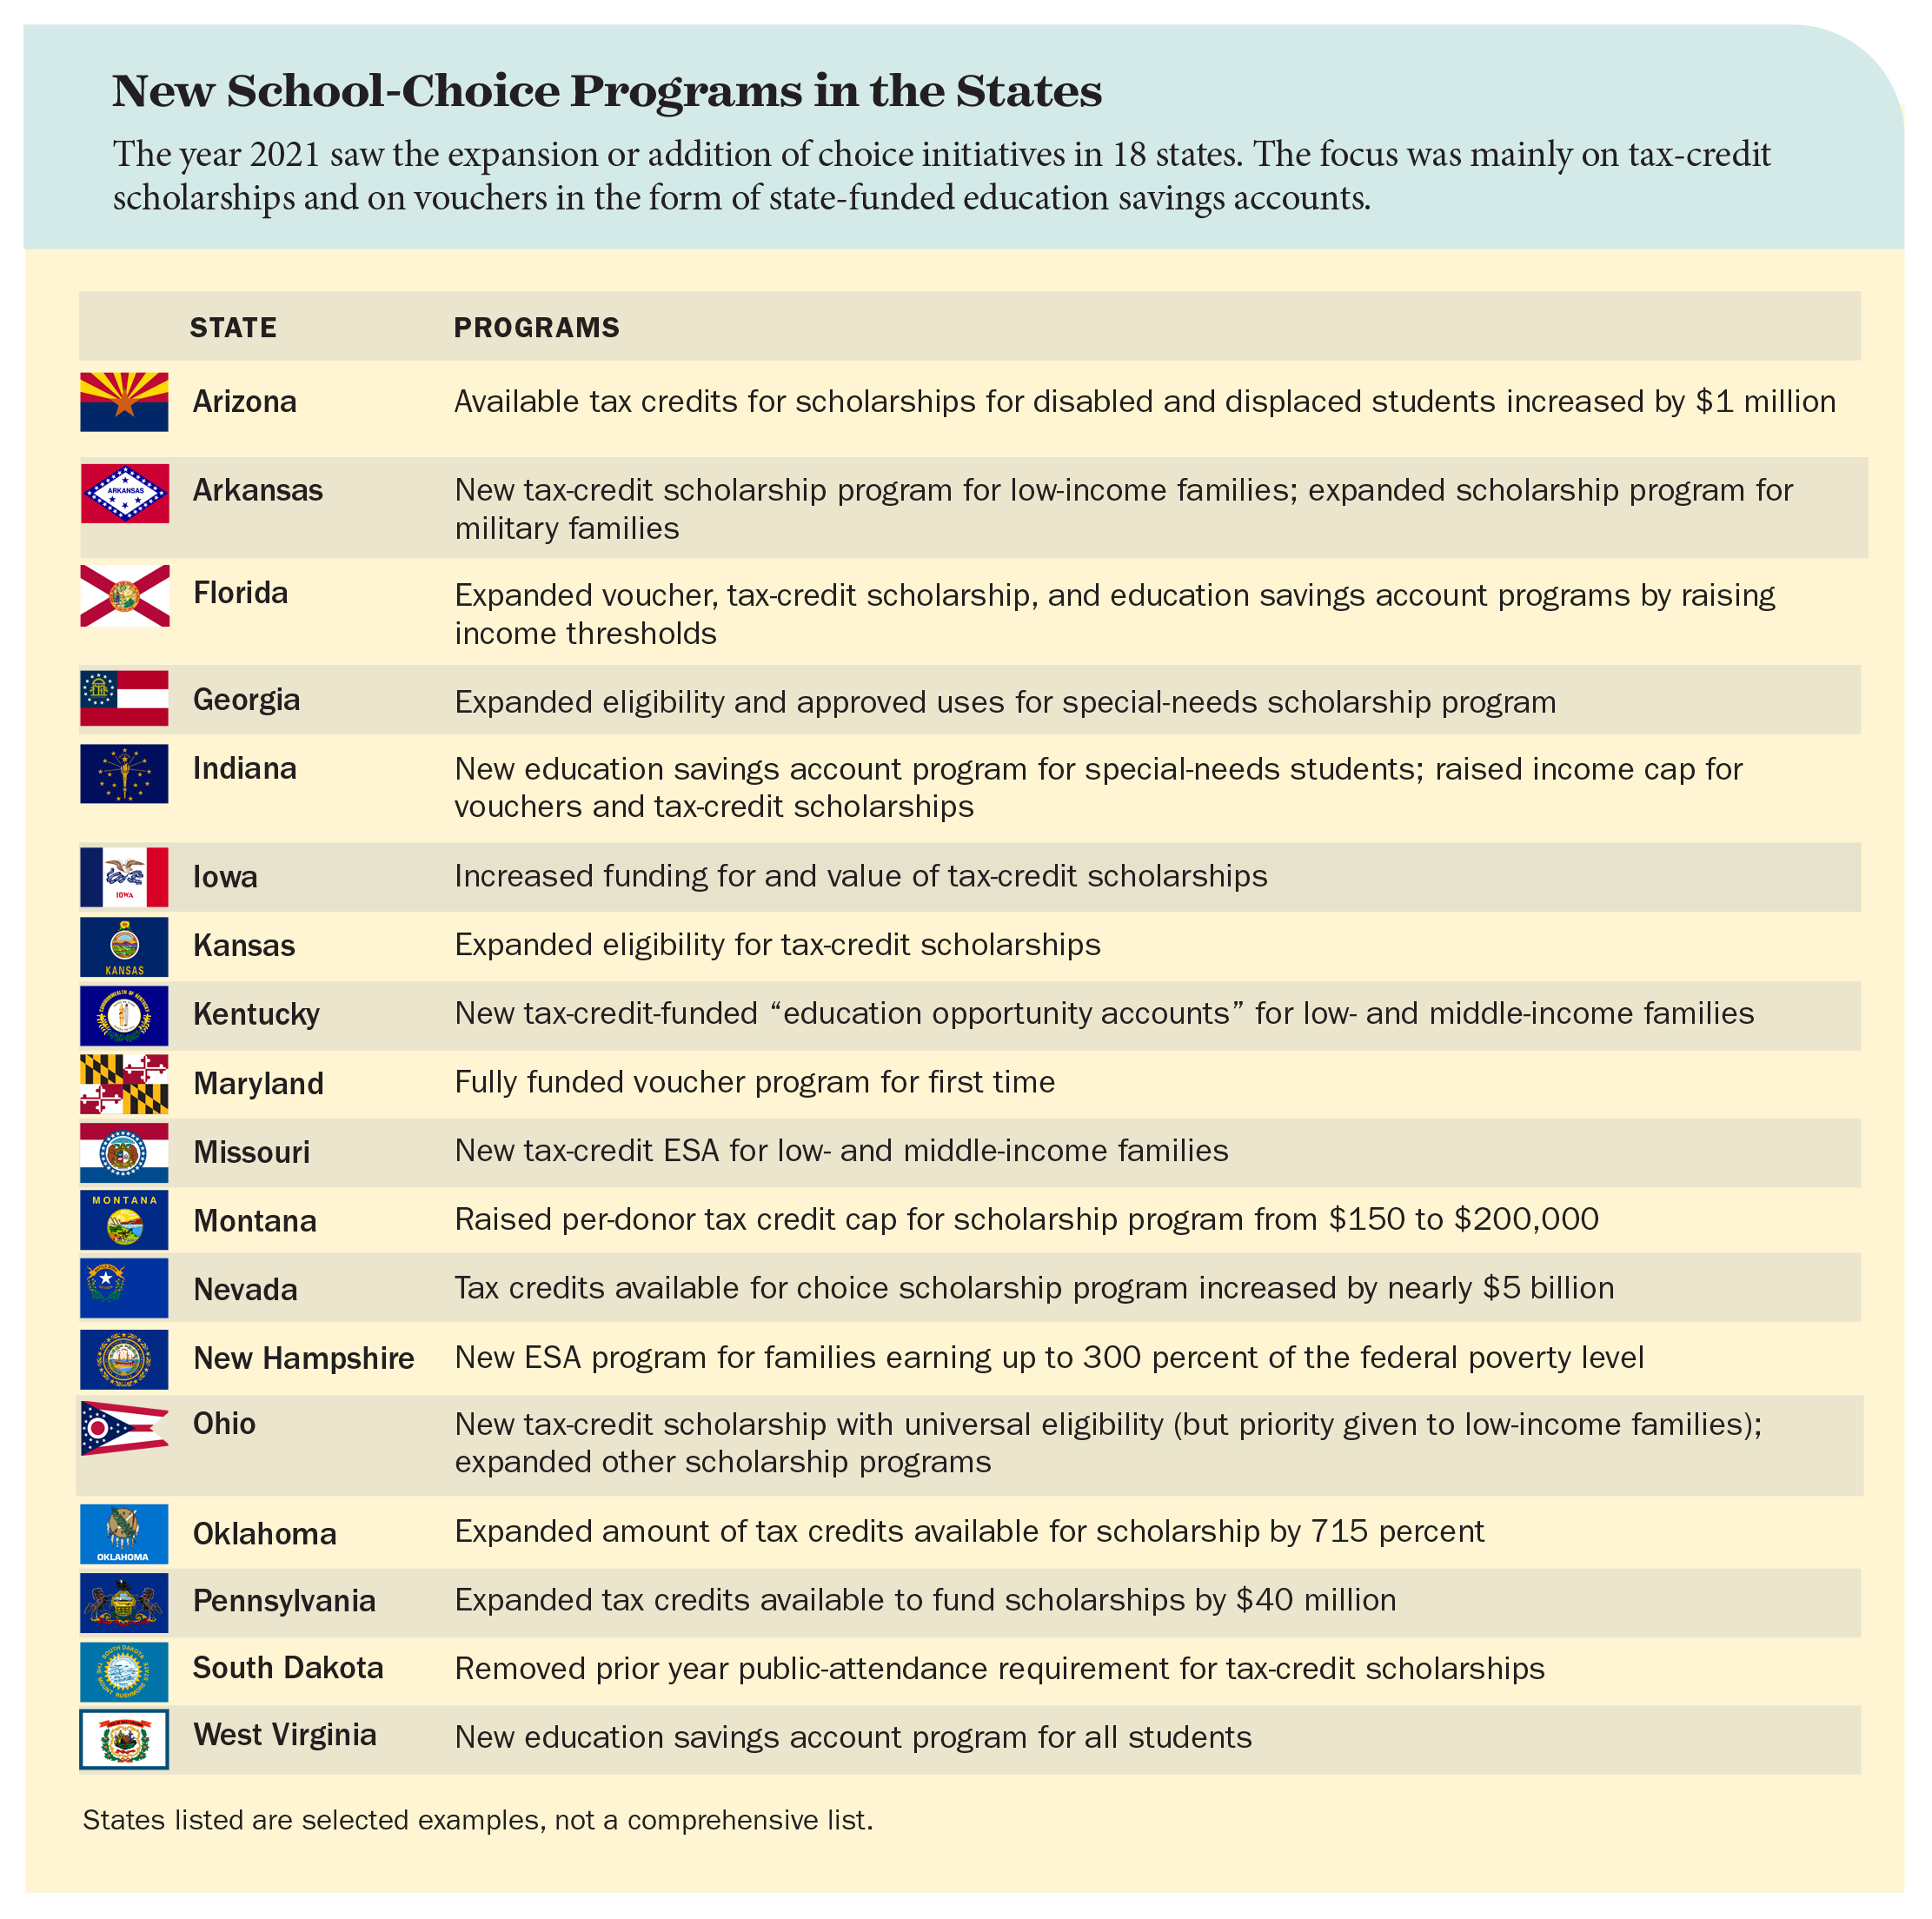 New School-Choice Programs in the States